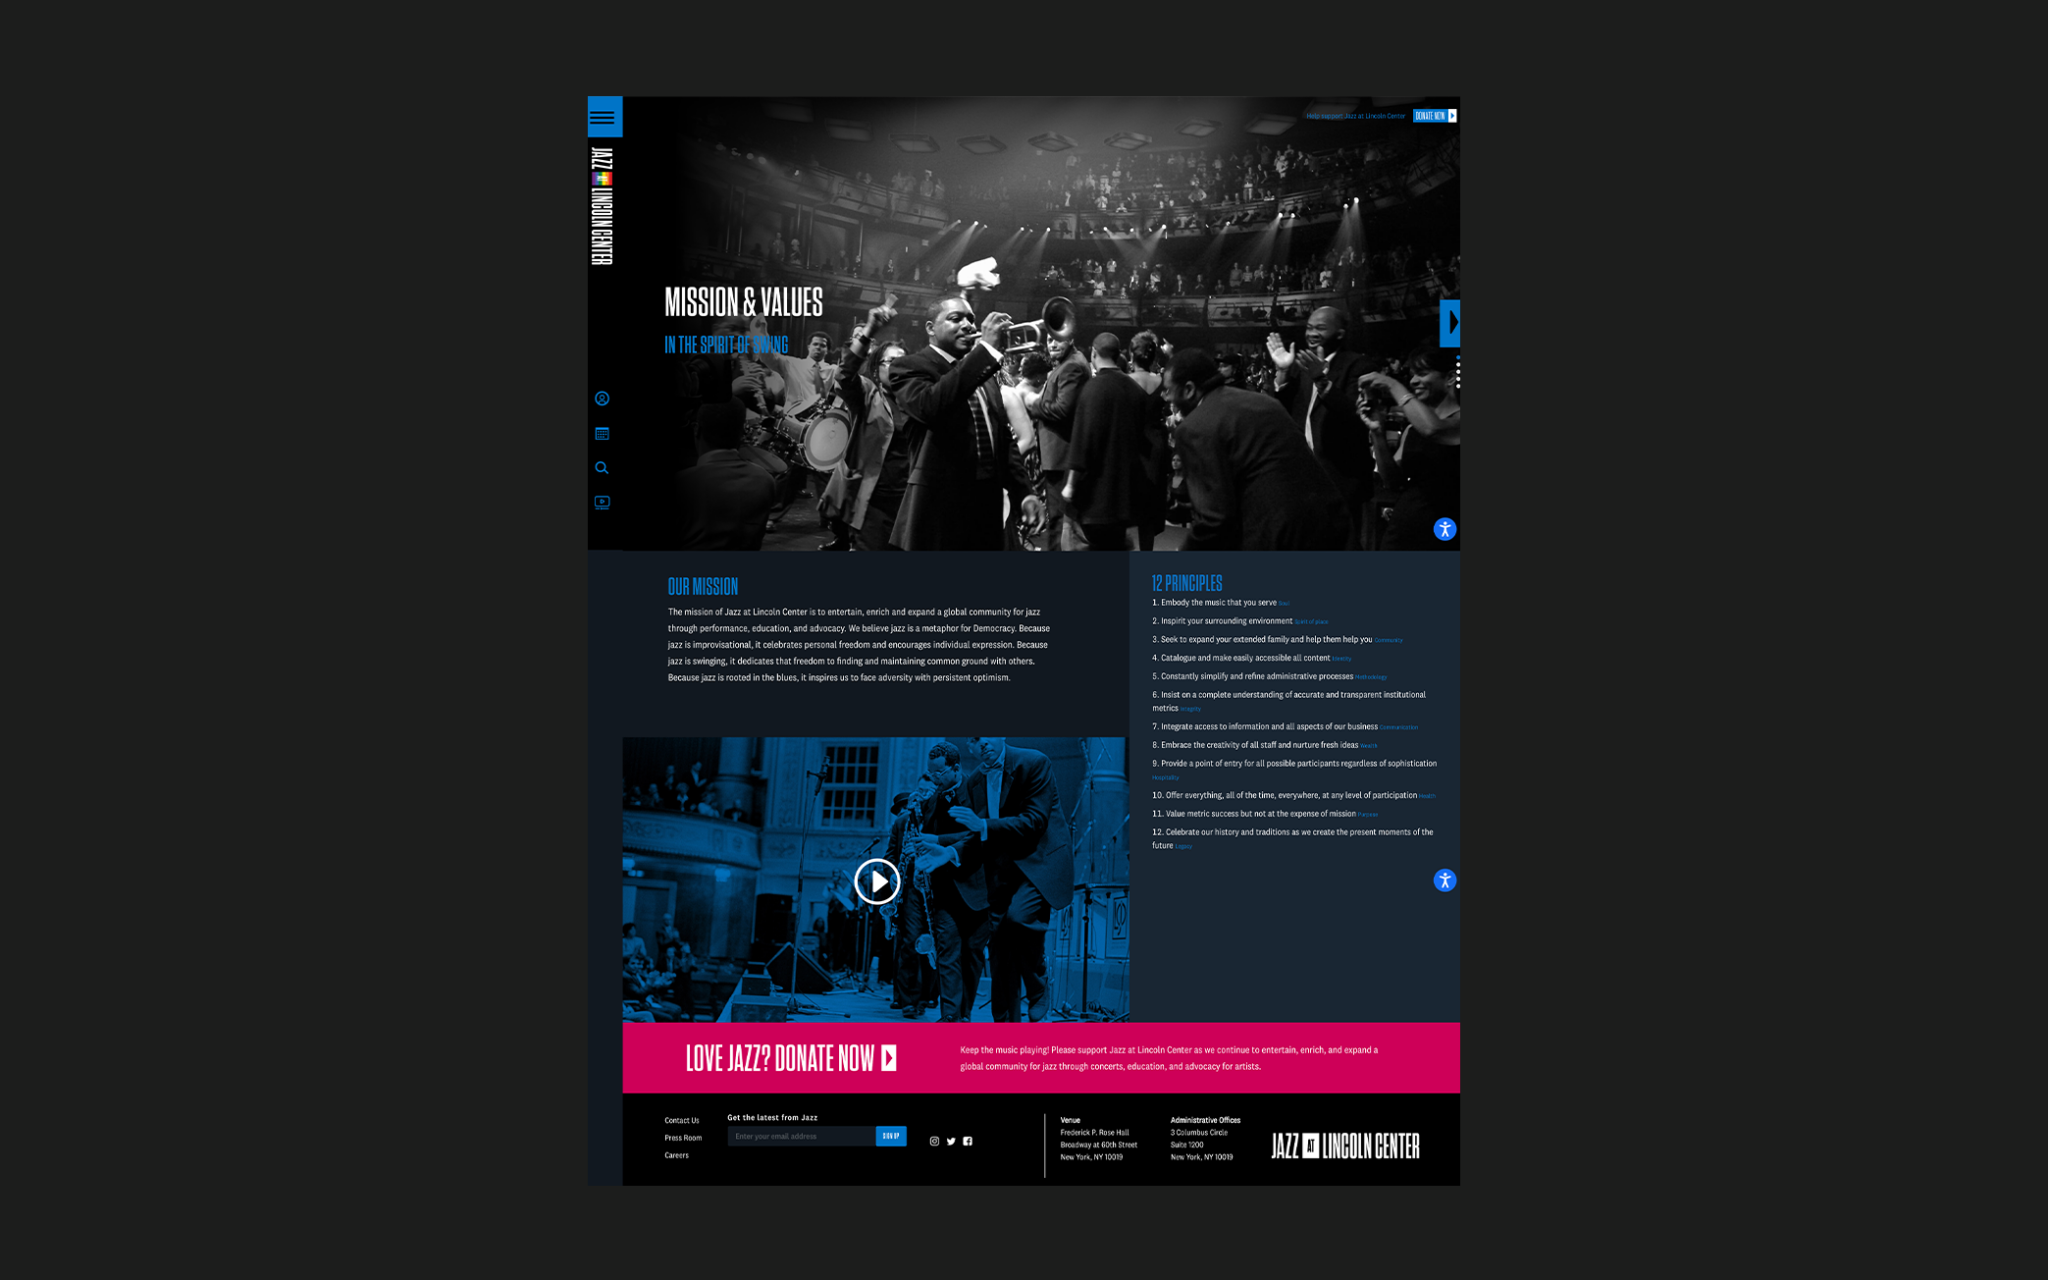 Jazz at Lincoln Center’s website, a nonprofit web design project by Ironpaper.